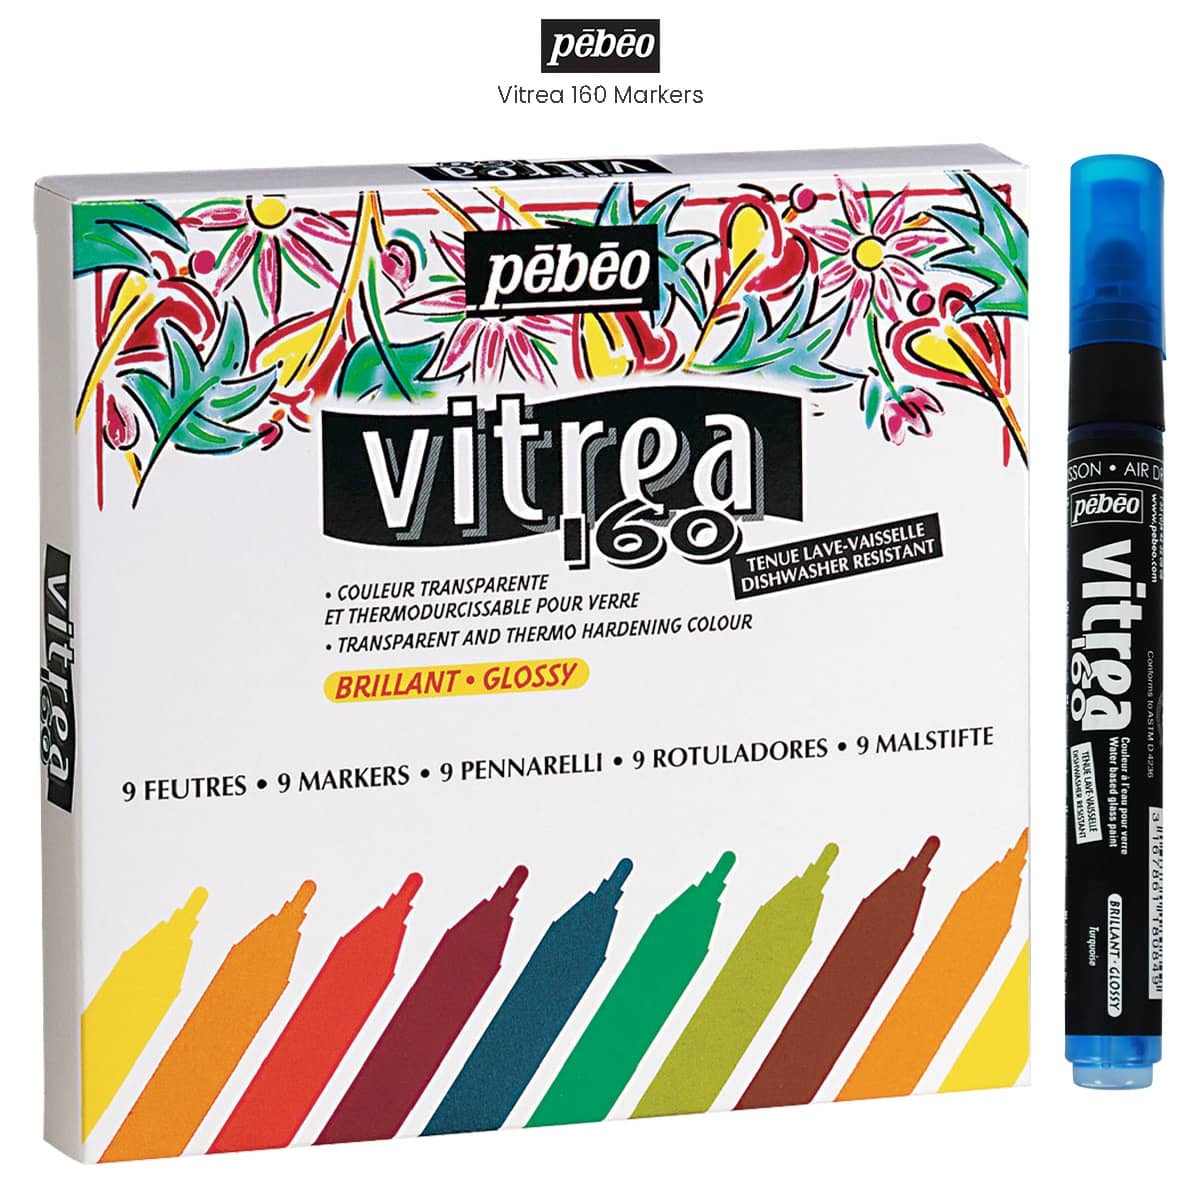 Artfinity Rich Metallic Markers - Professional Metallic Markers for Artists, Drawing, Calligraphy, & More! - [Chrome - 8.5mm